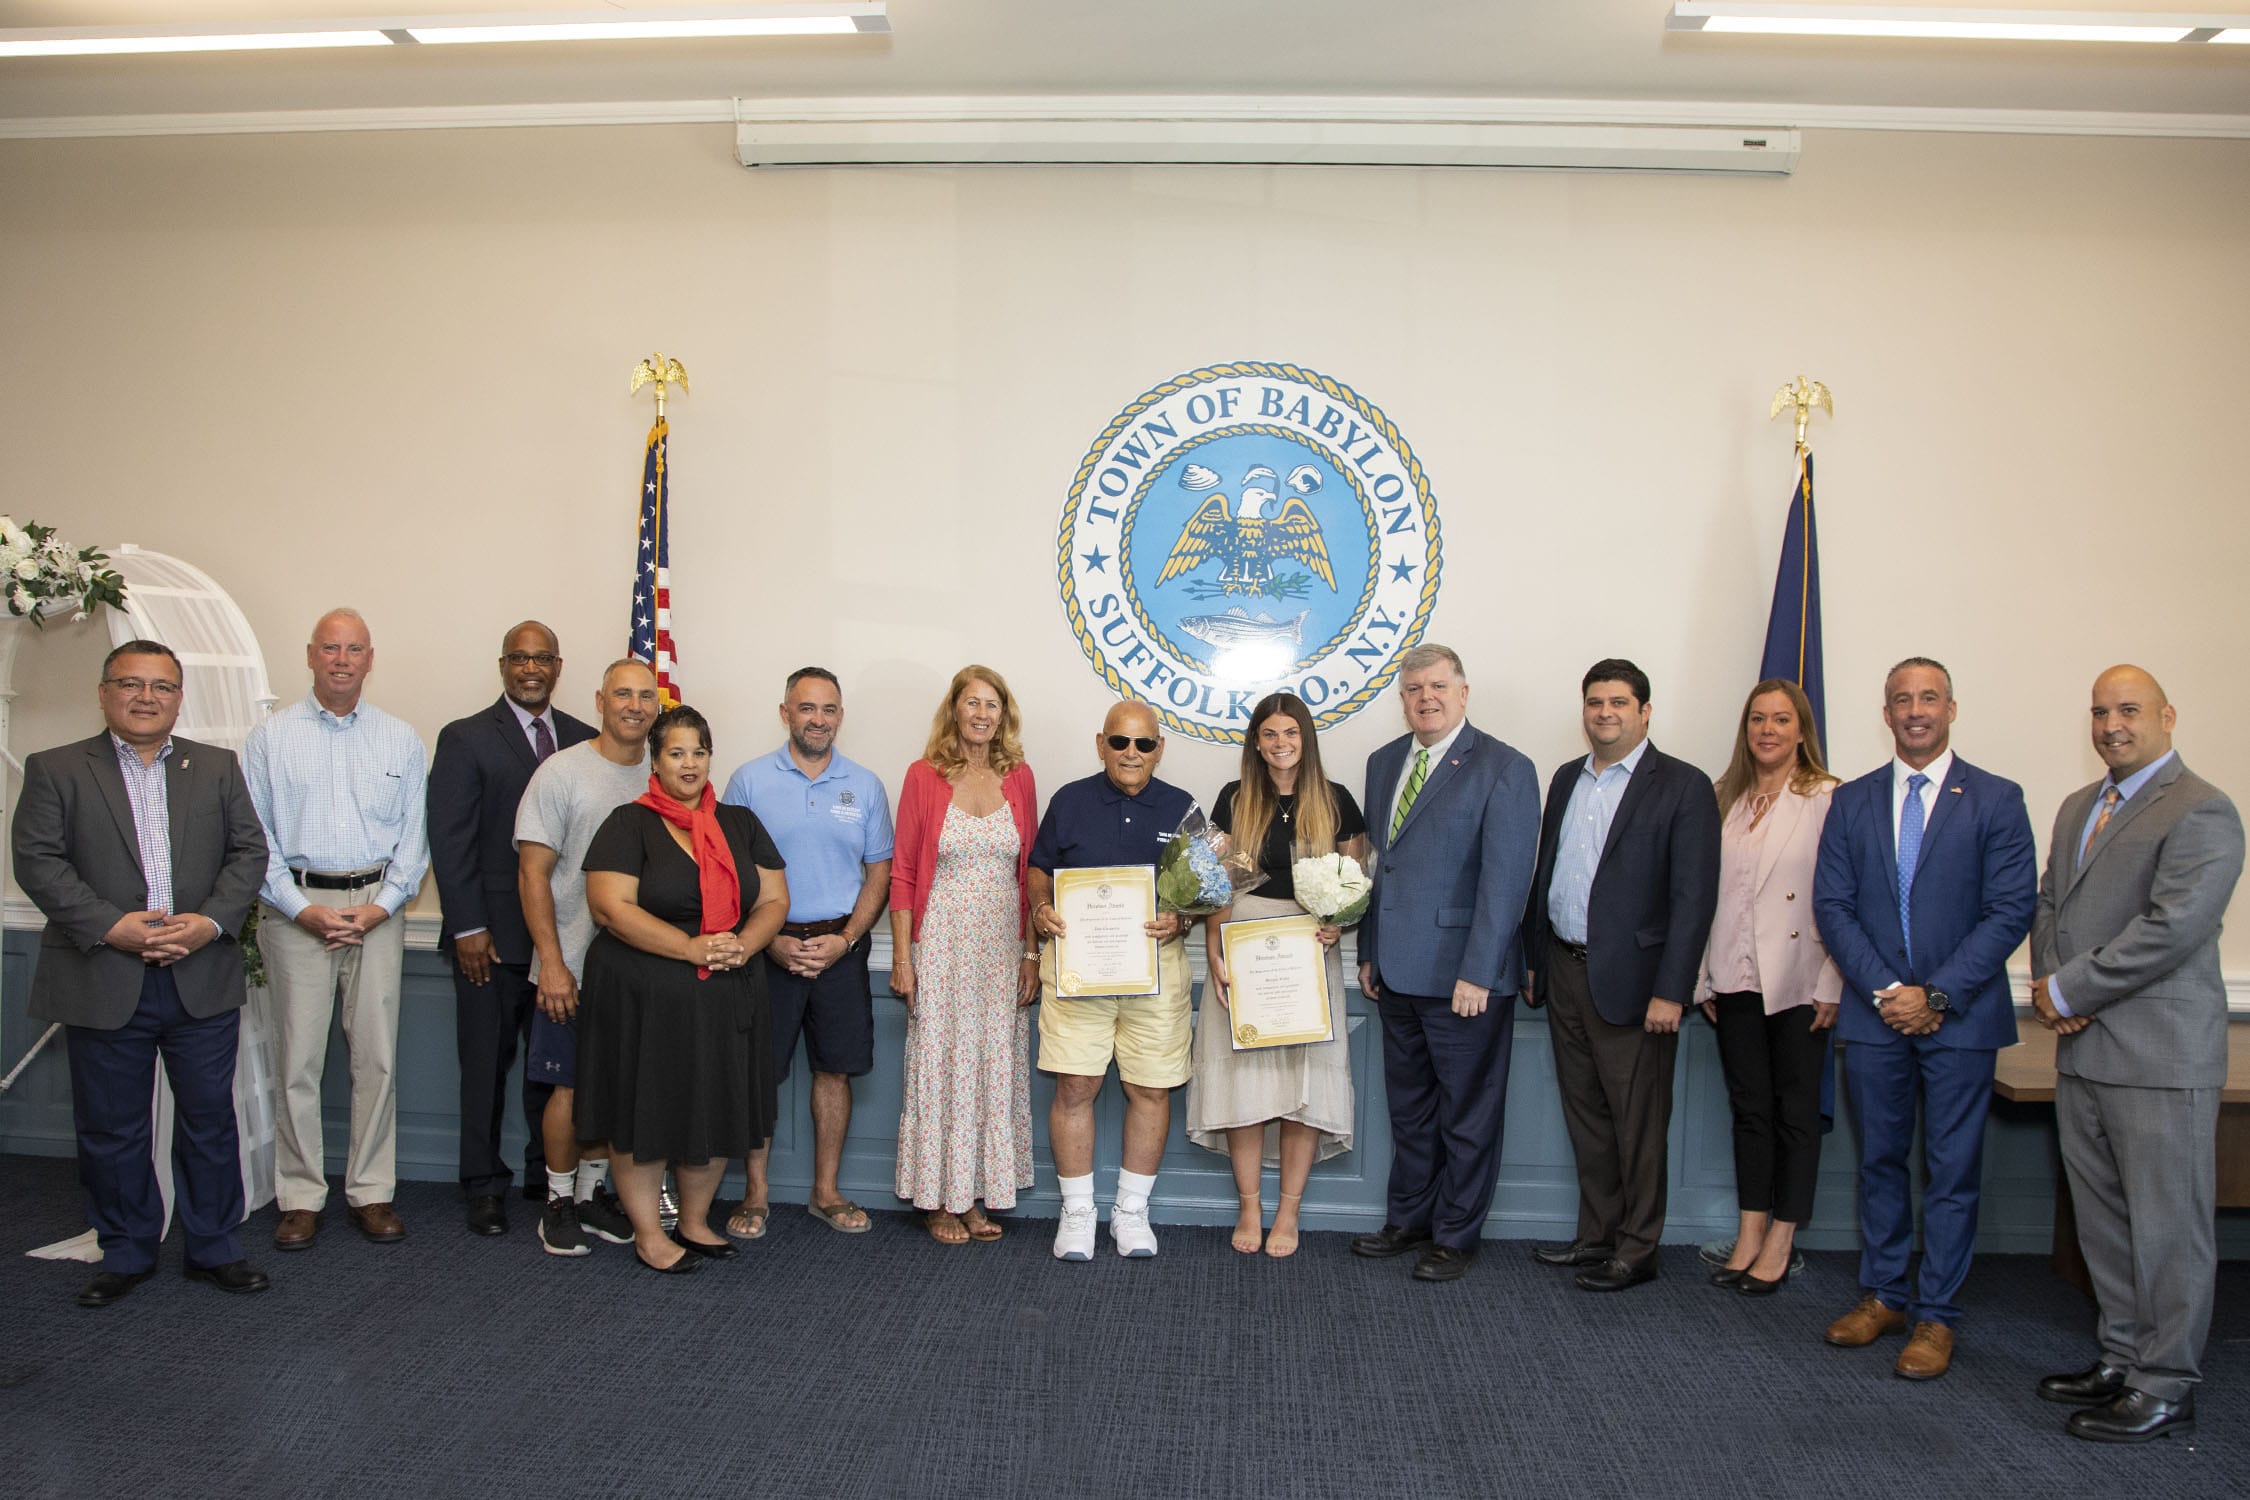 Town Gives Heroism Award To Summer Parks Employees Who Aided Wounded Cyclist